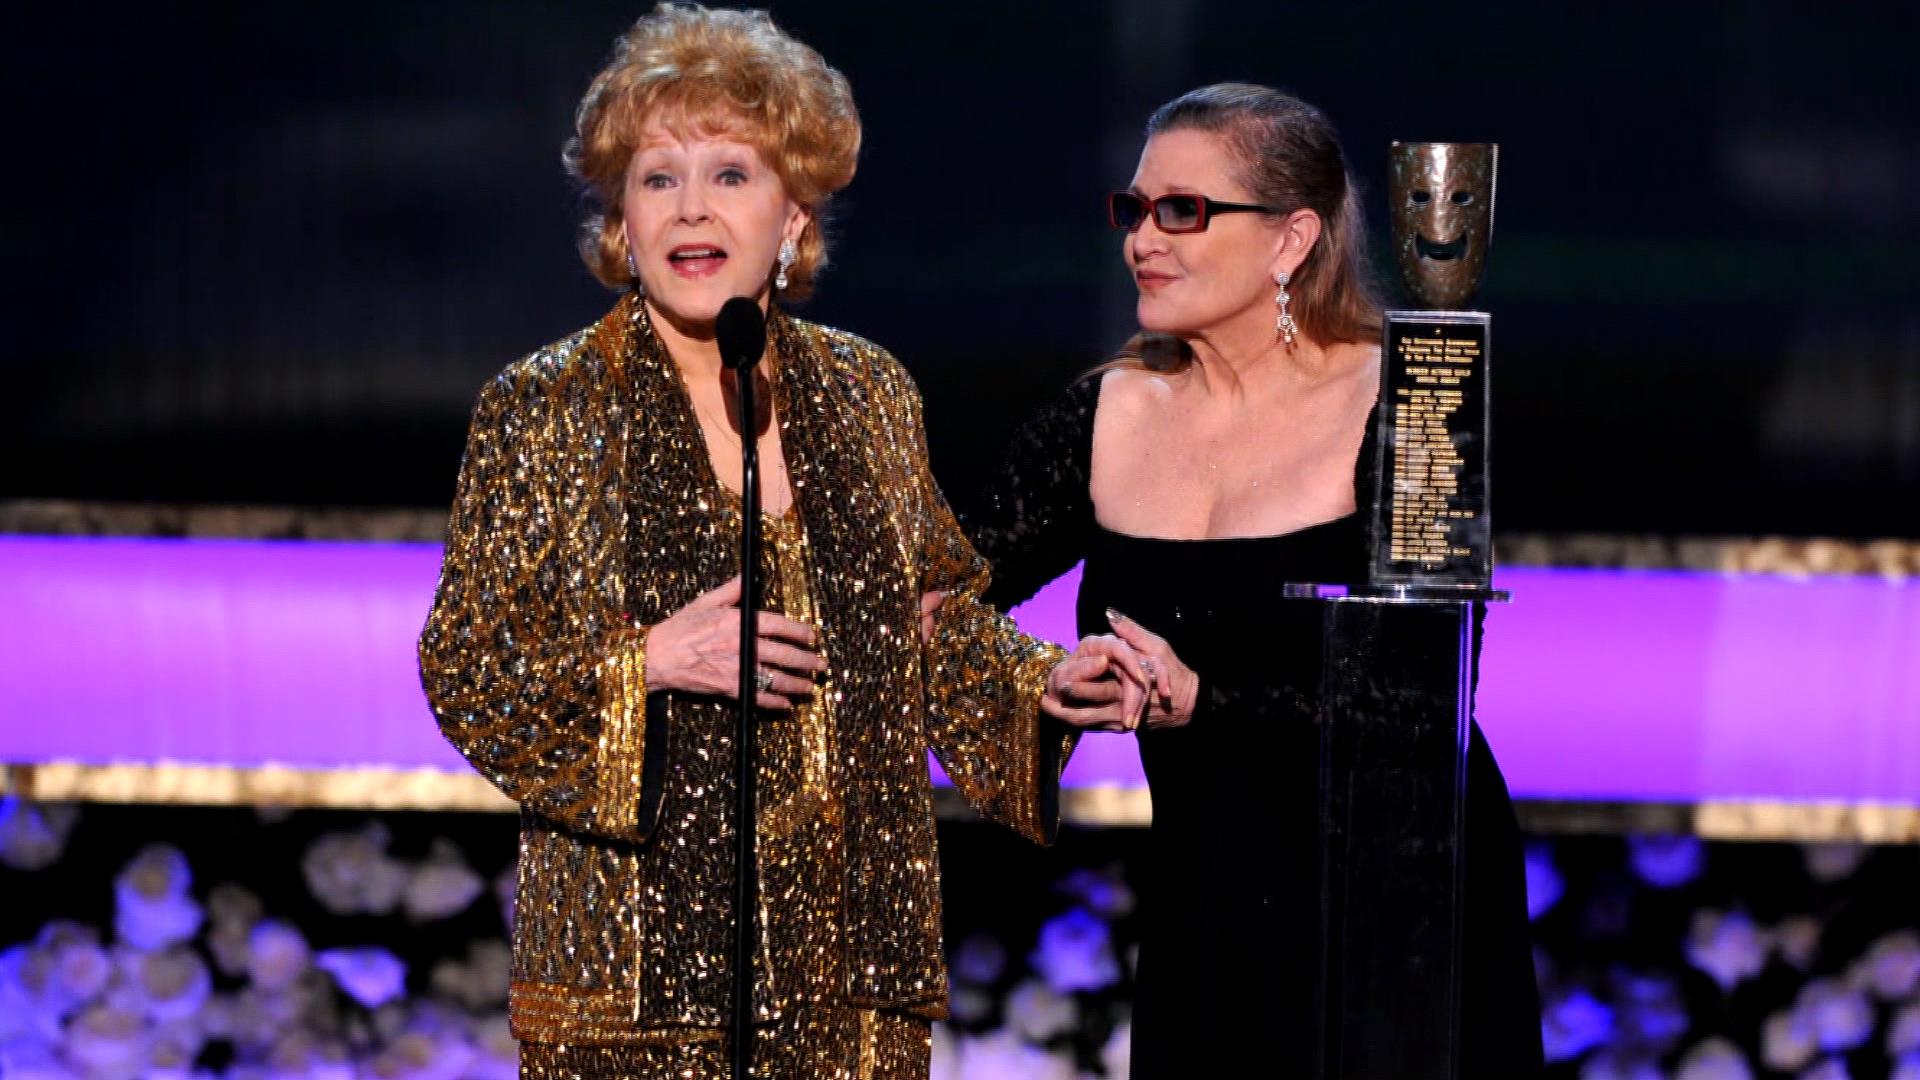 Joint funeral for Carrie Fisher and Debbie Reynolds under consideration